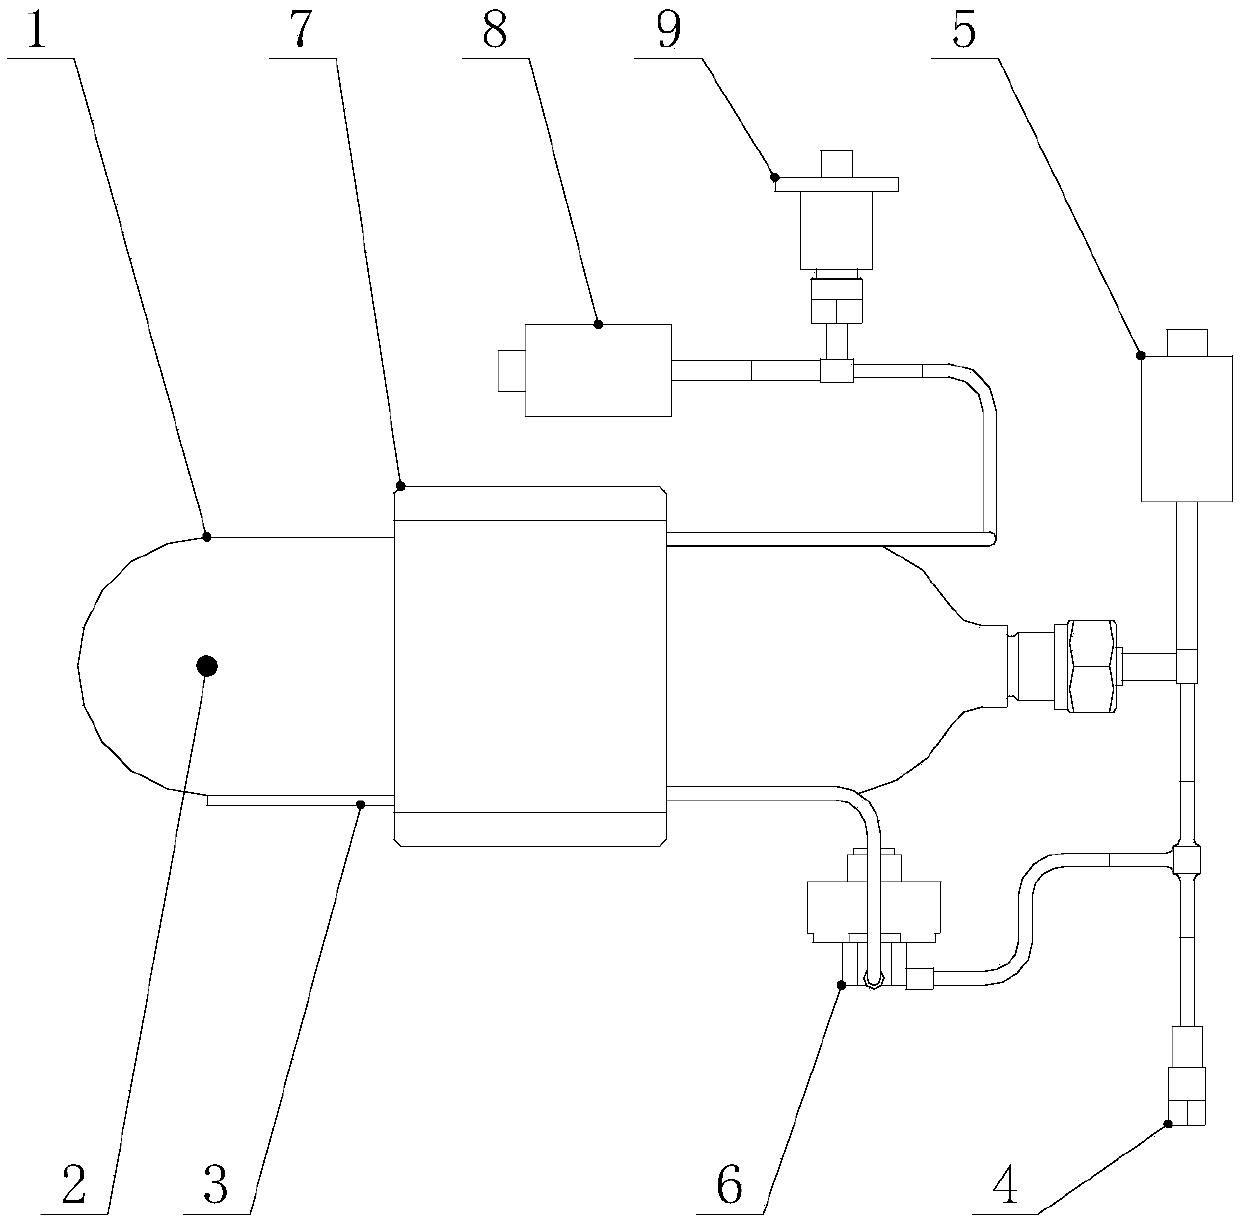 Small satellite liquefied gas constant pressure propulsion system and method